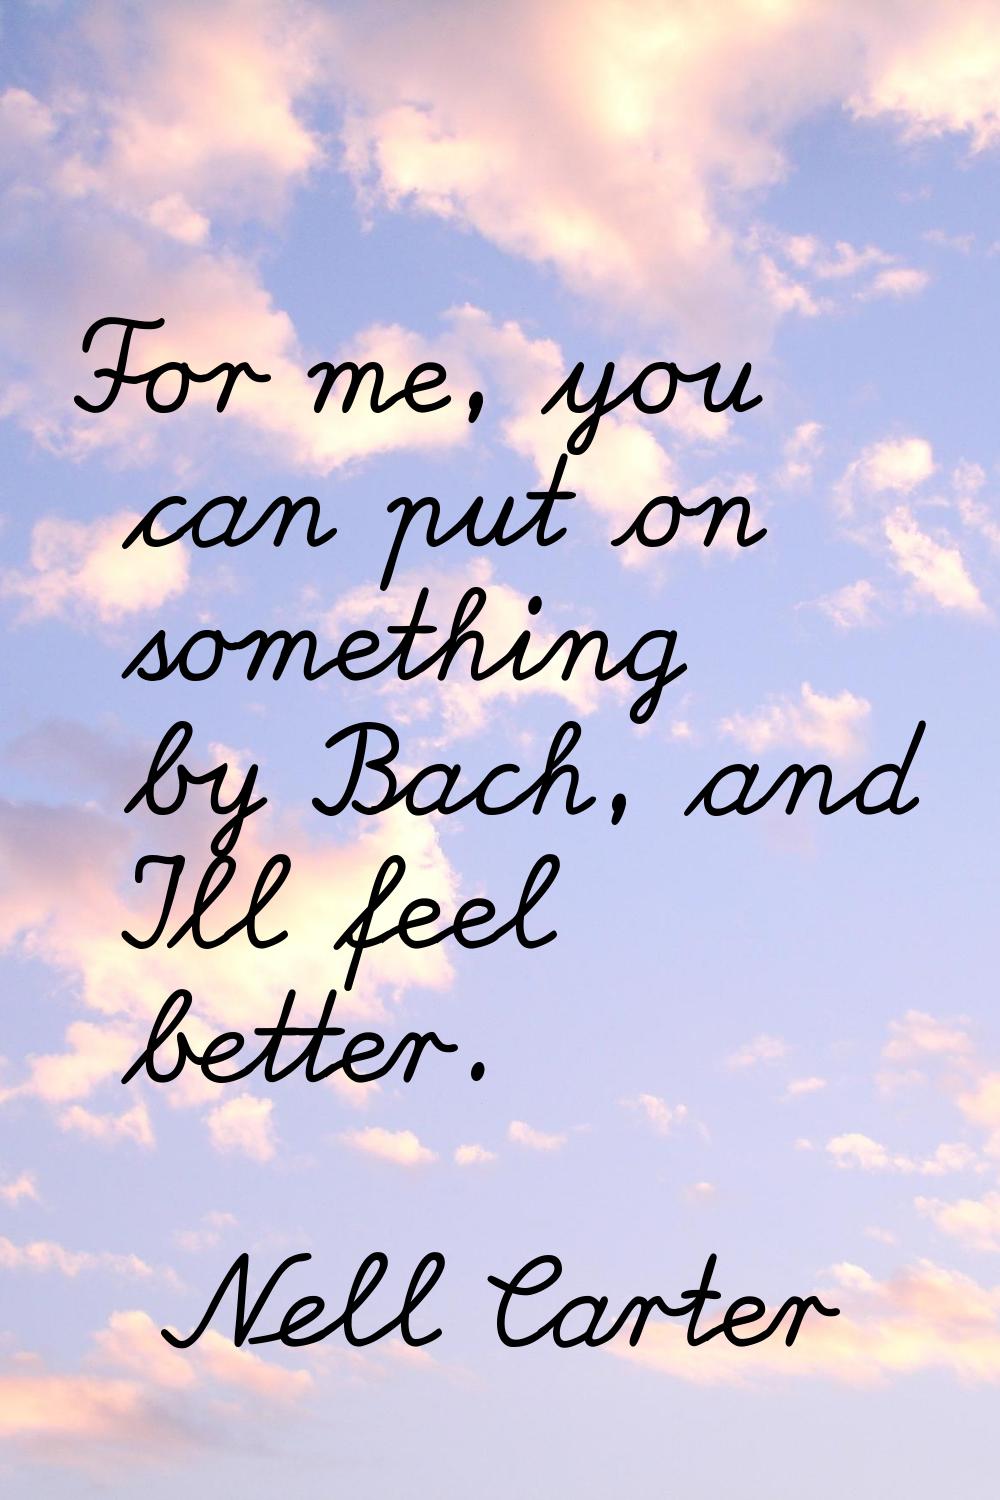 For me, you can put on something by Bach, and I'll feel better.